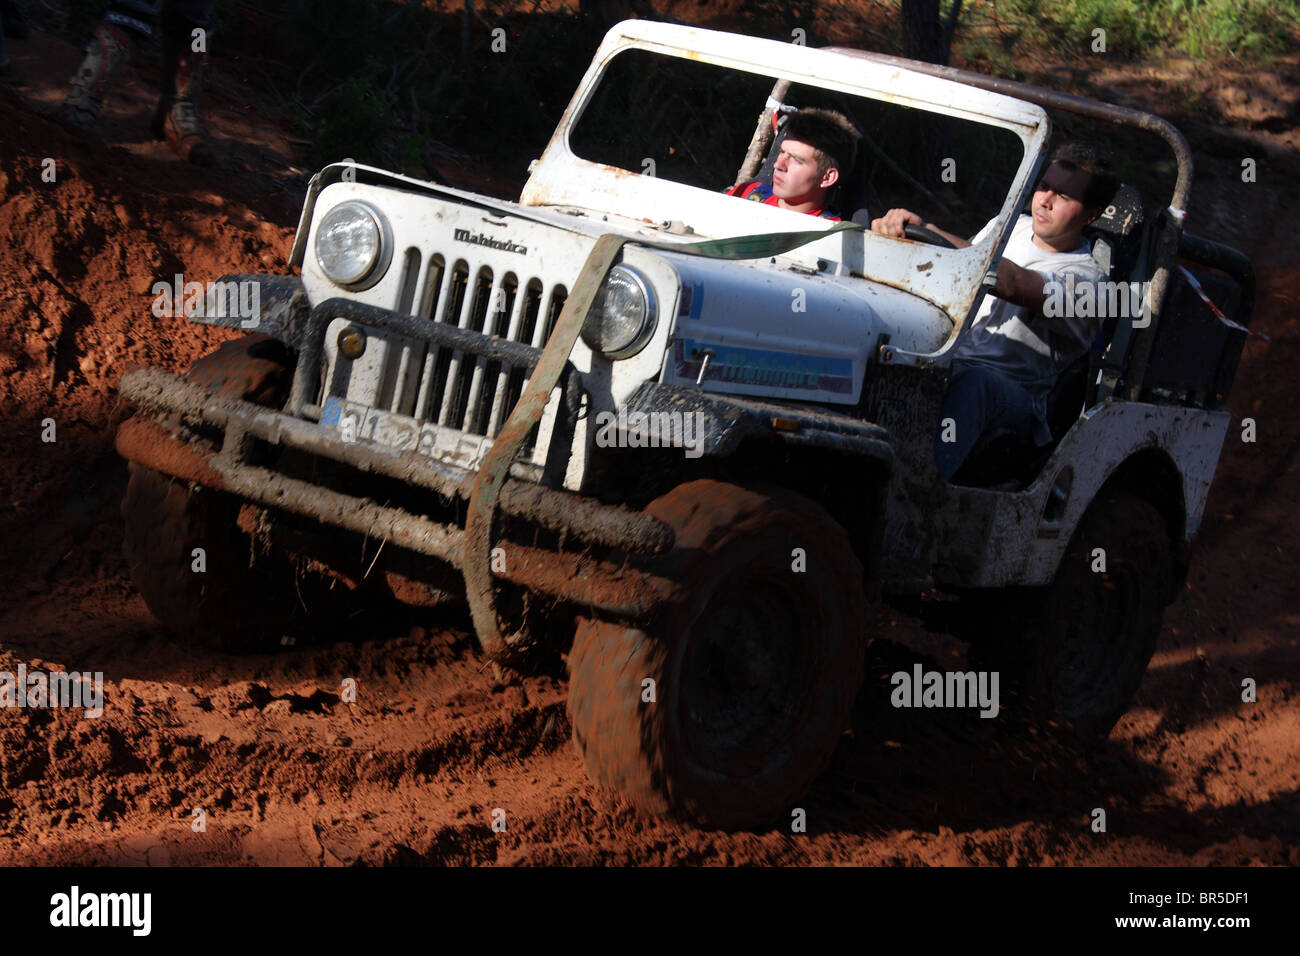 A Mahindra white jeep during an up hill section of an off road rally. Stock Photo